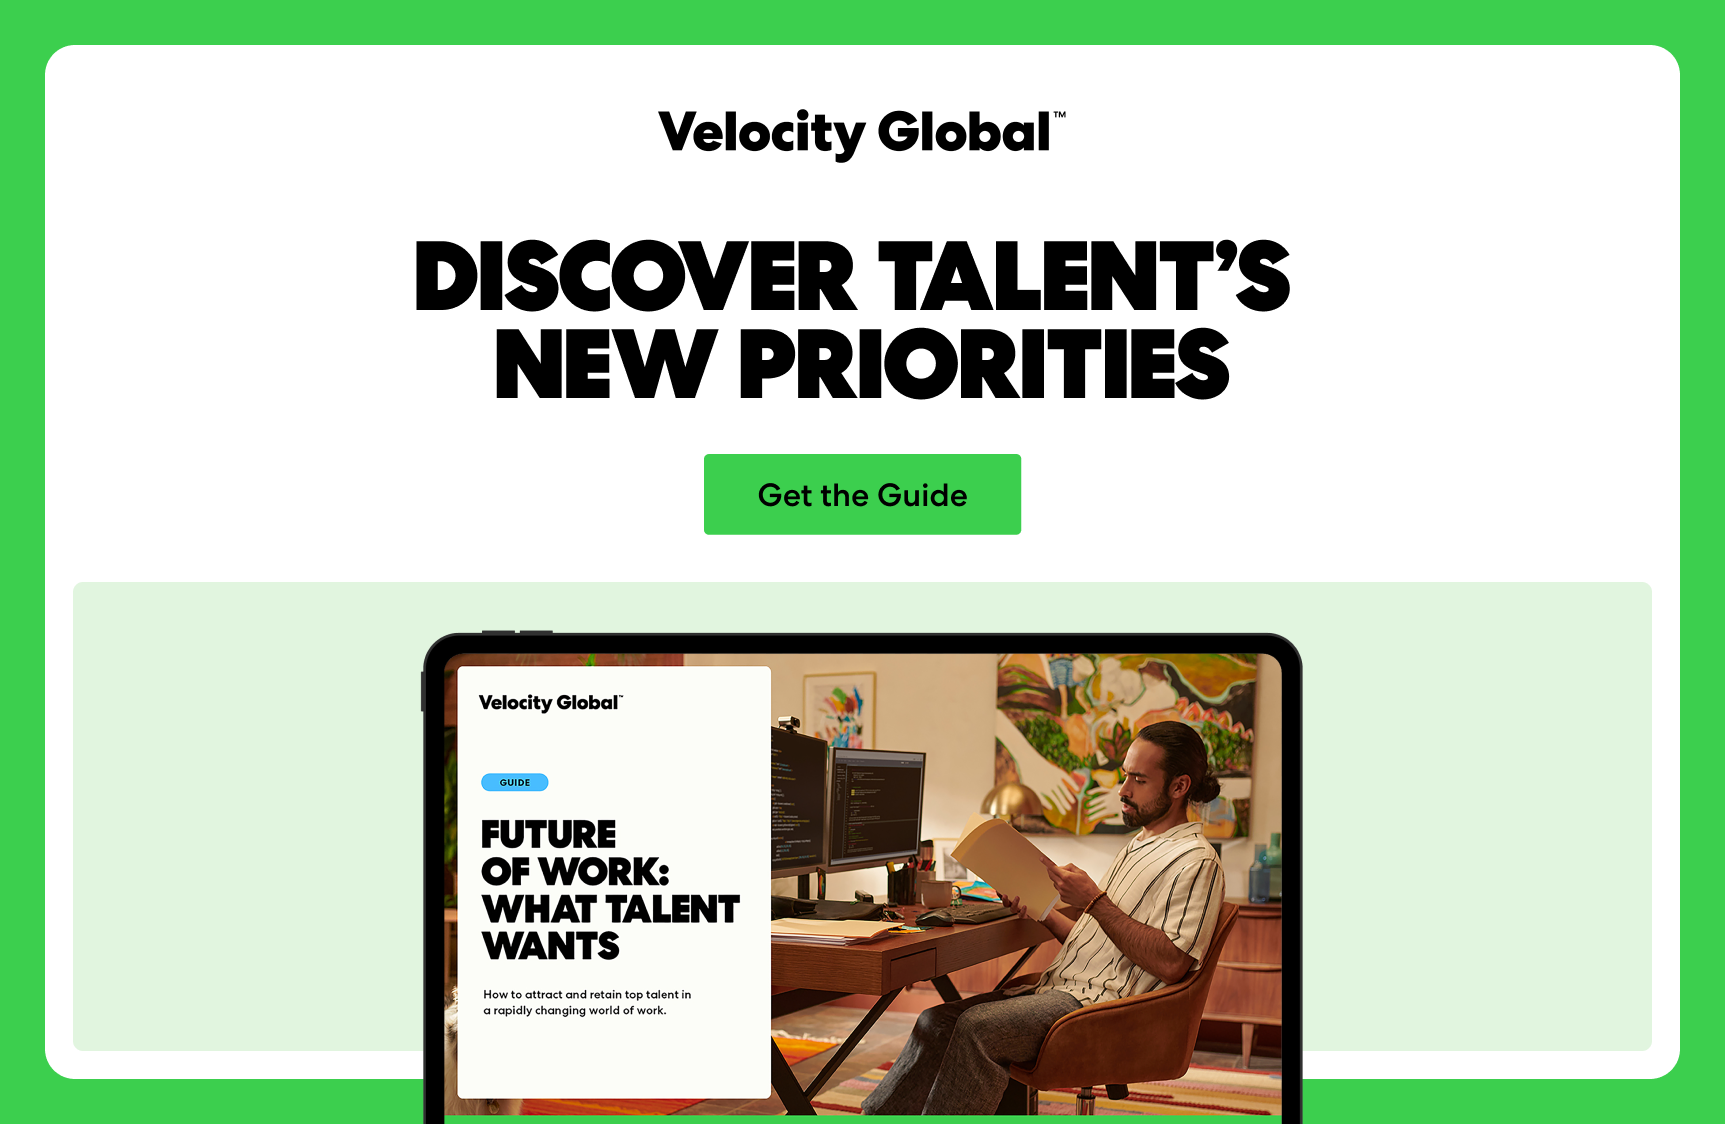 DISCOVER TALENT’S NEW PRIORITIES